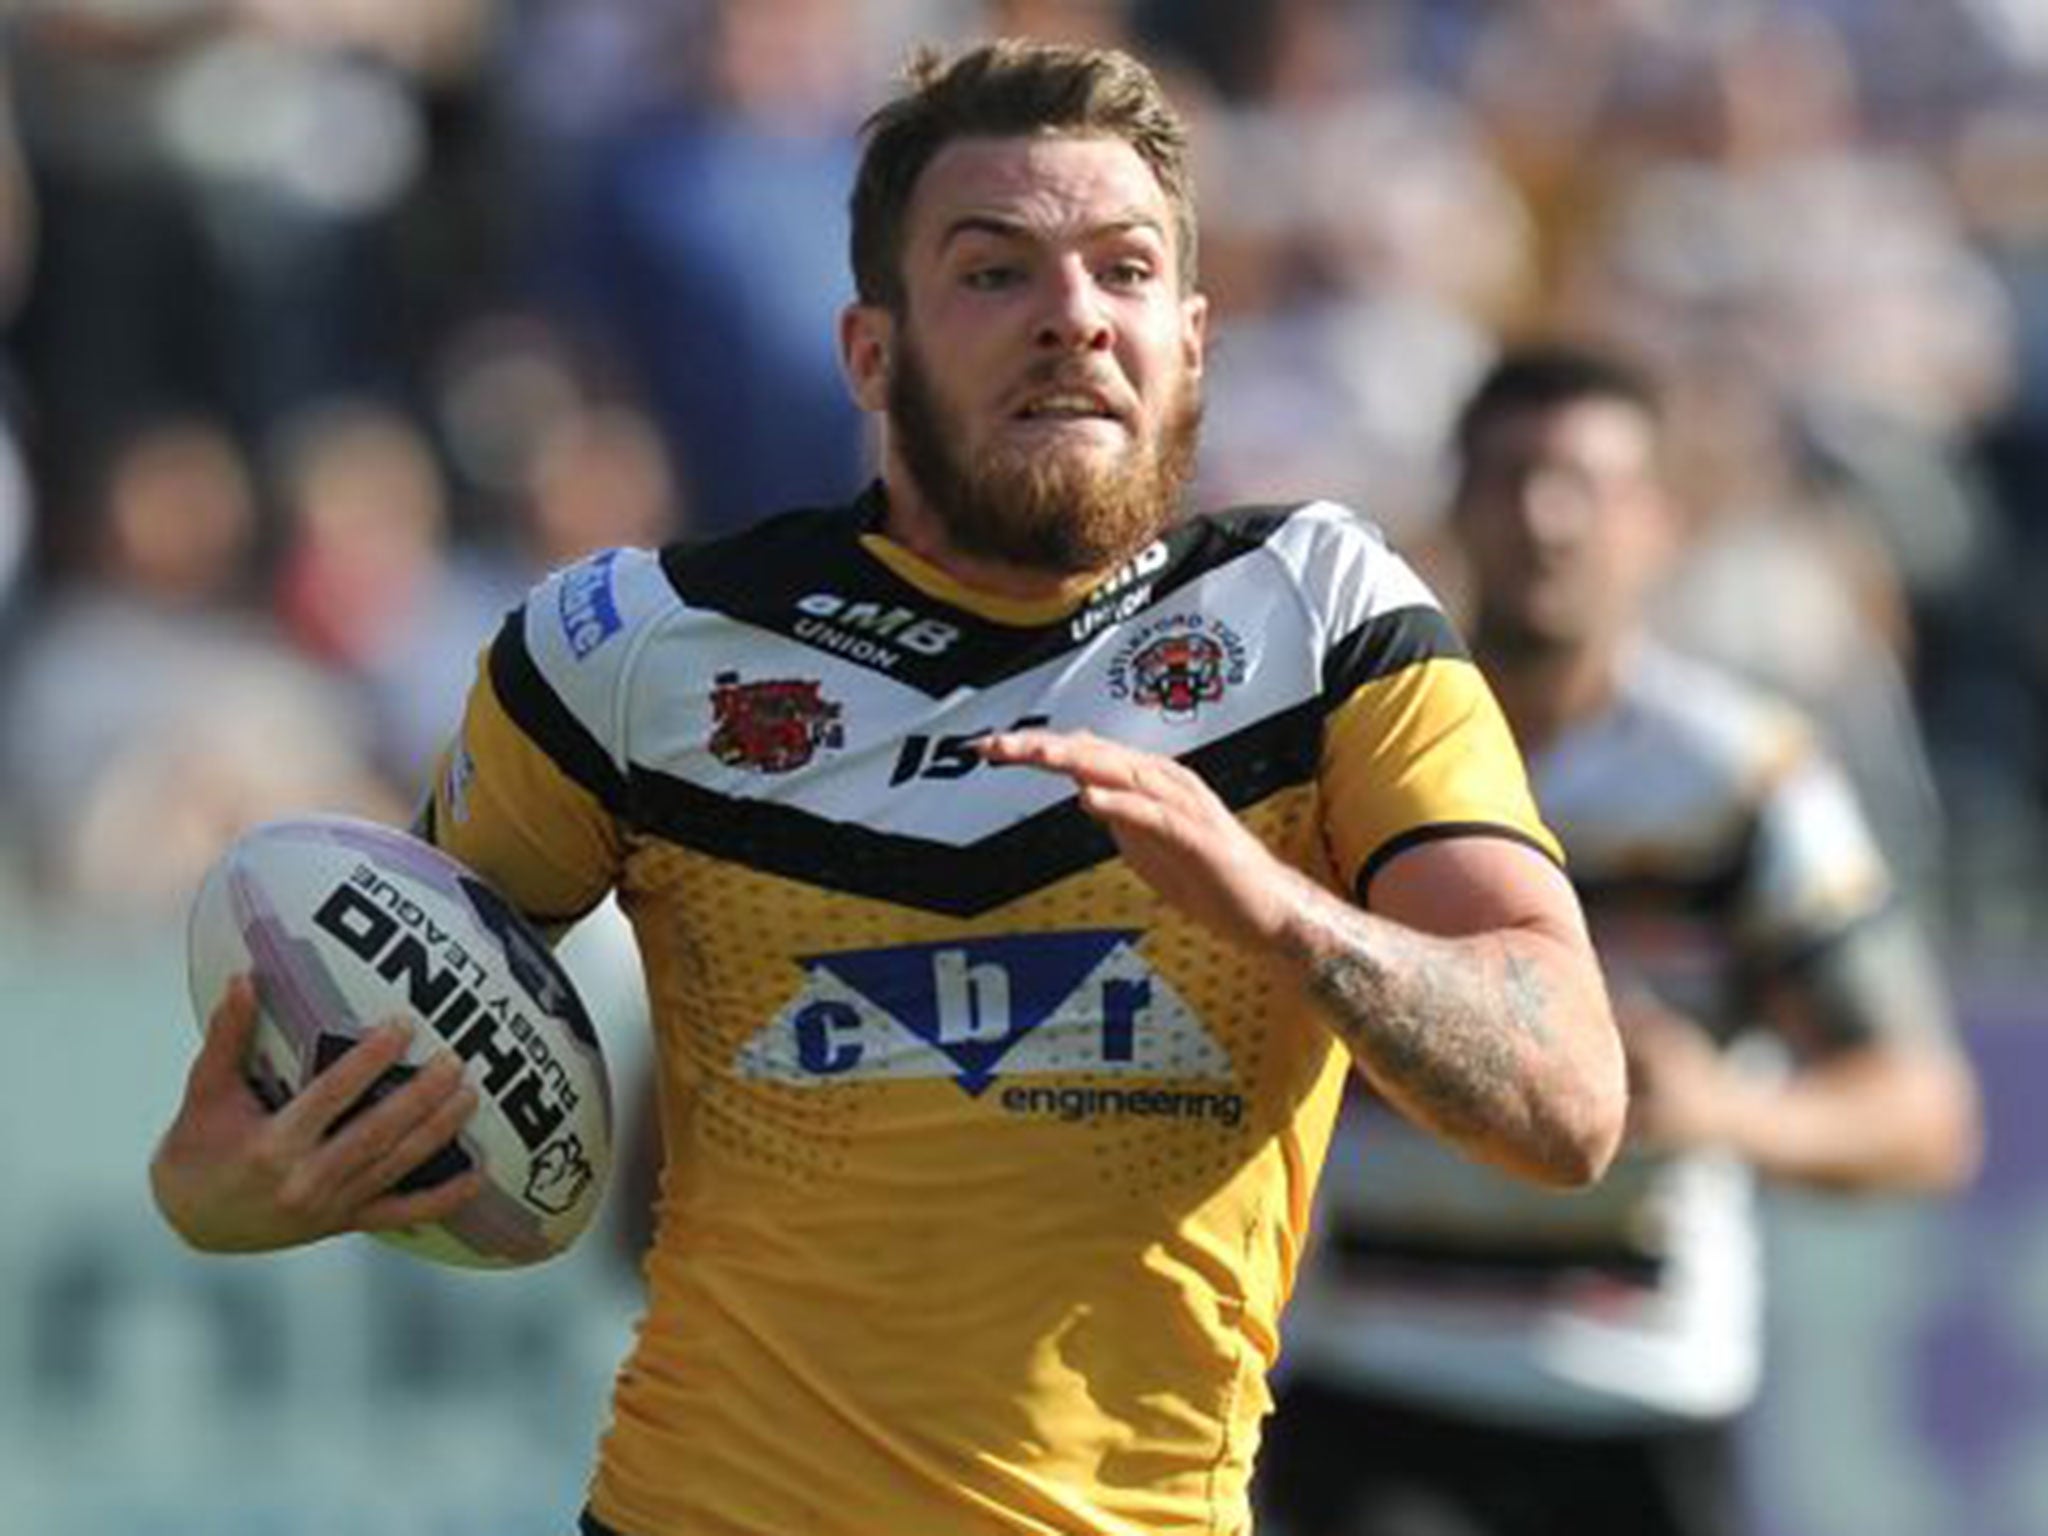 Castleford’s Daryl Clark runs in for a superb solo try during the 32-18 win over Bradford on Sunday